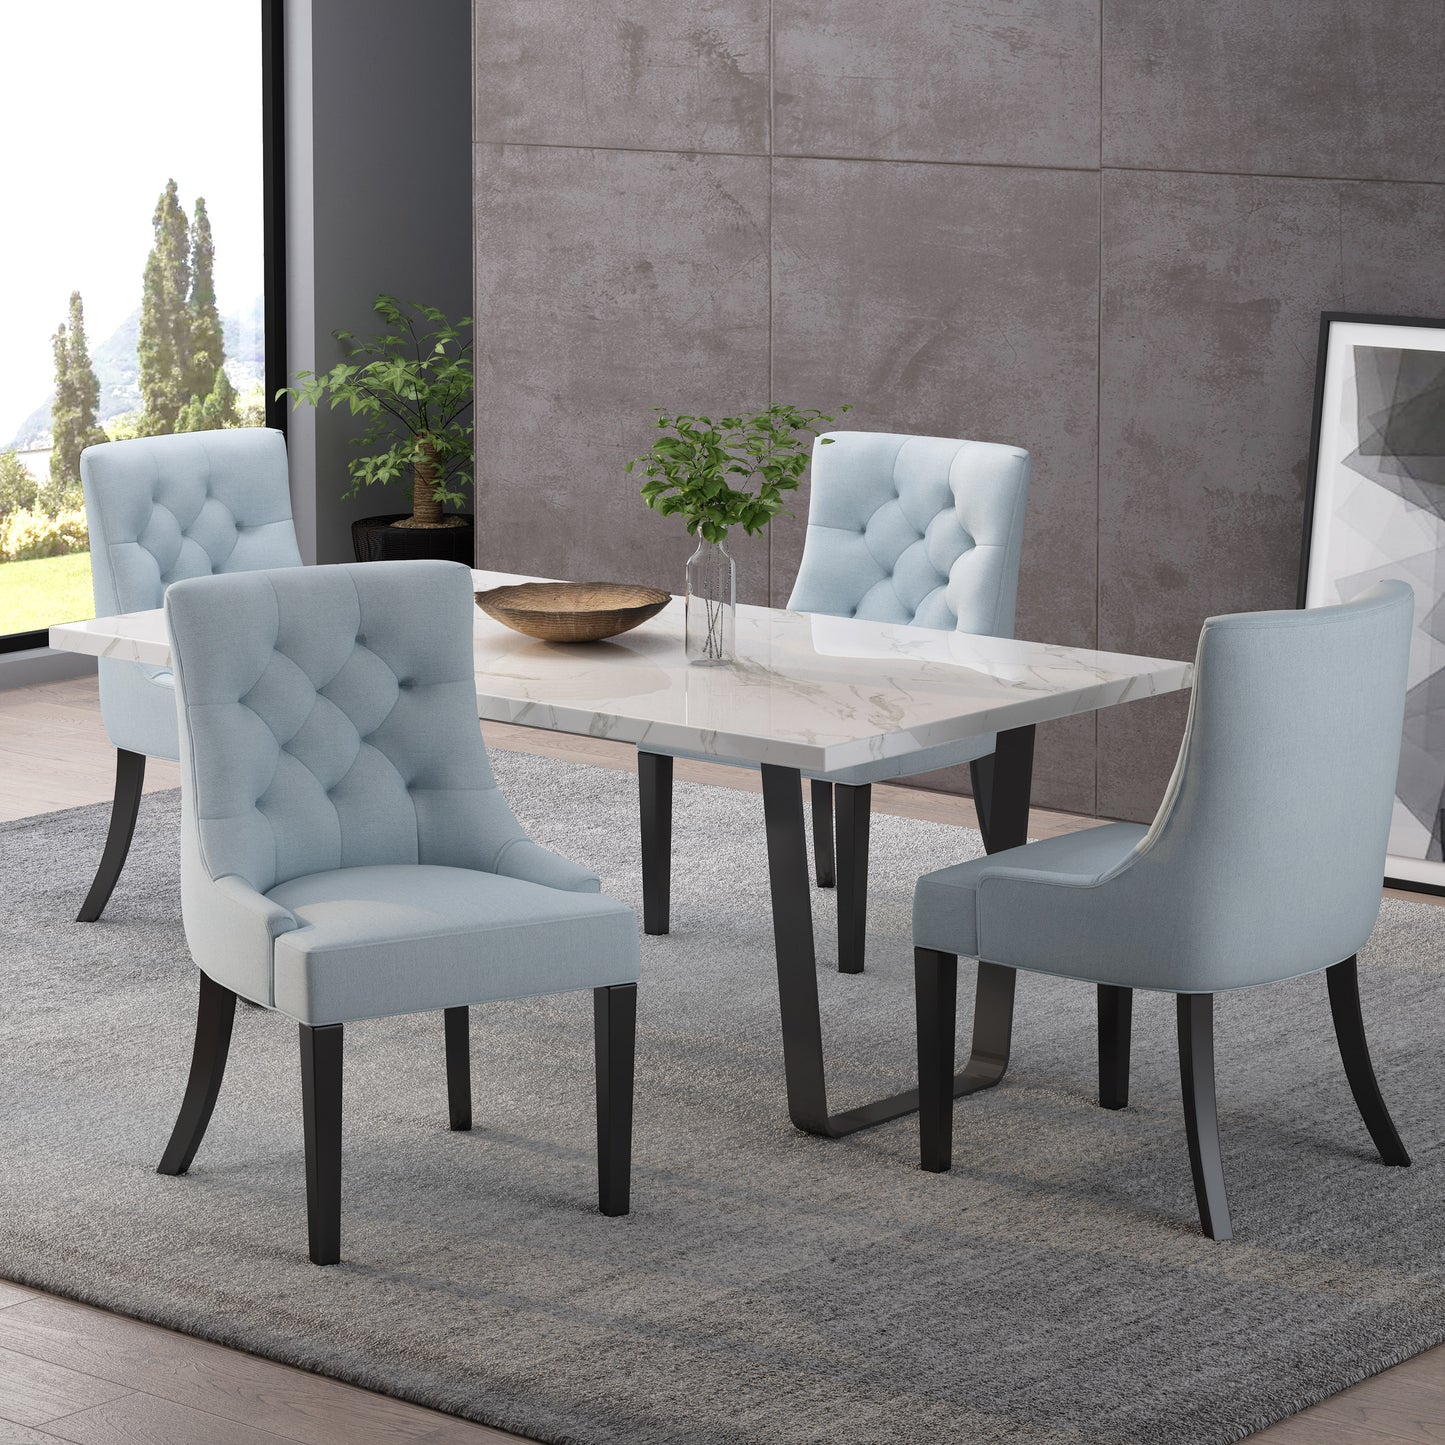 Stacy Hourglass Fabric Dining Chairs (Set of 4)